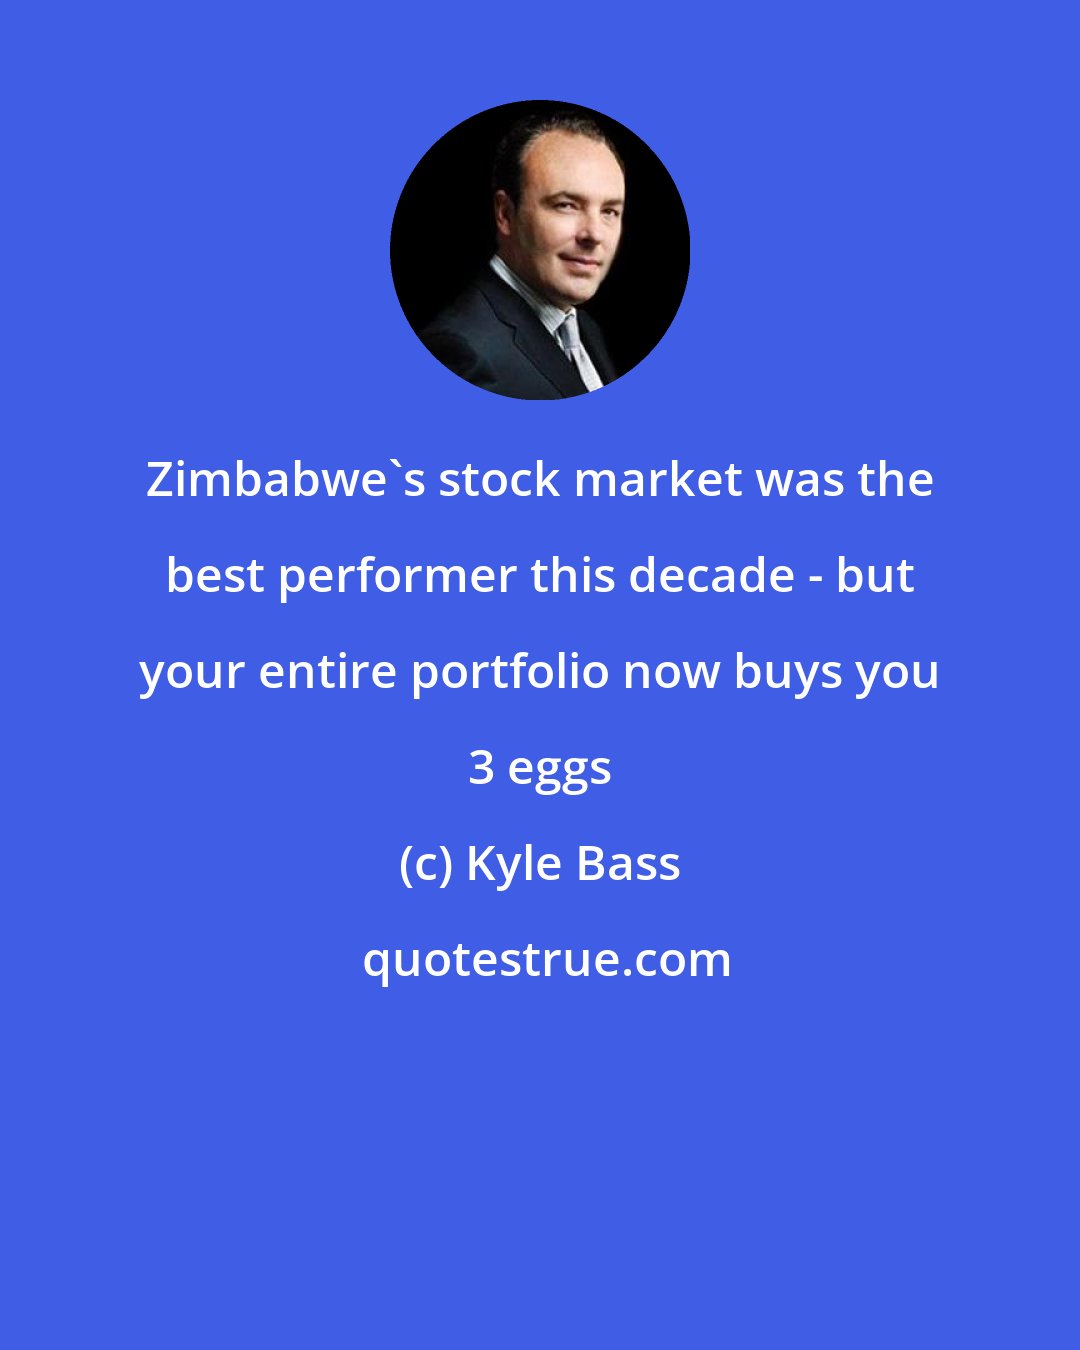 Kyle Bass: Zimbabwe's stock market was the best performer this decade - but your entire portfolio now buys you 3 eggs